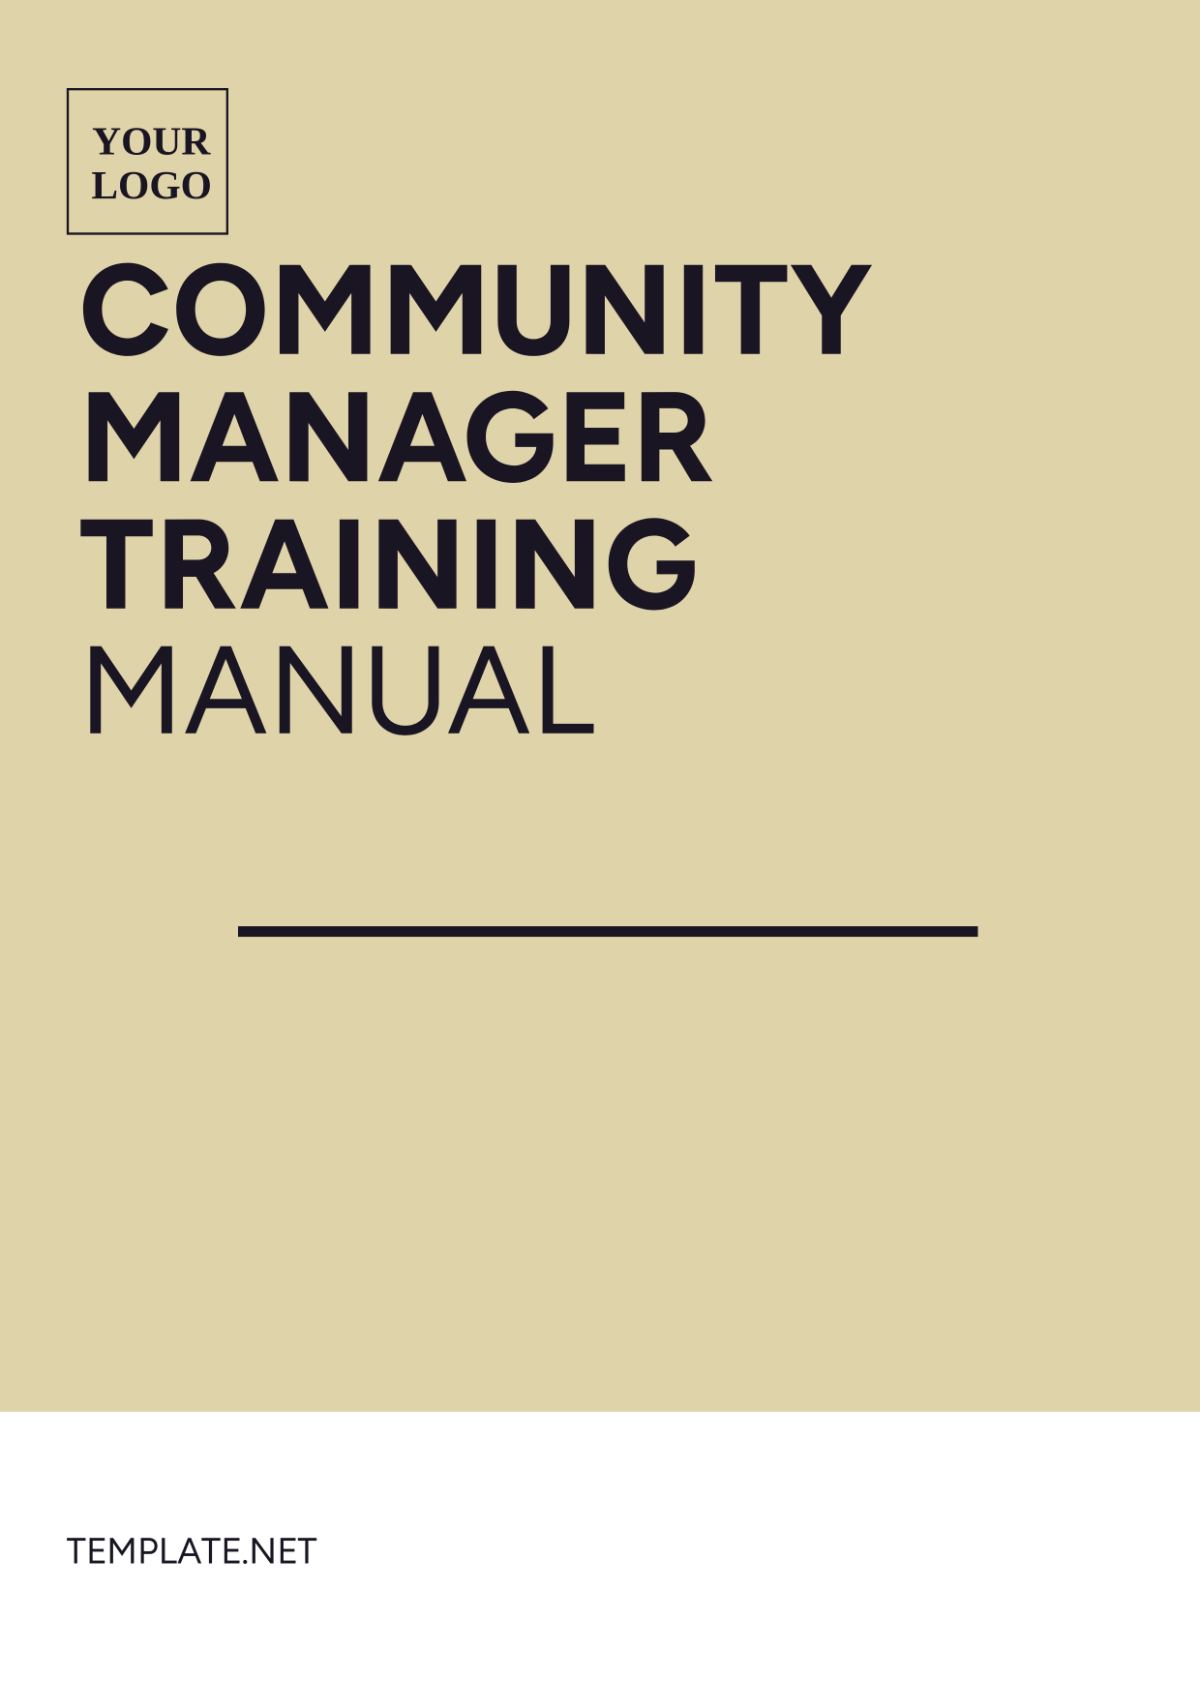 Community Manager Training Manual Template